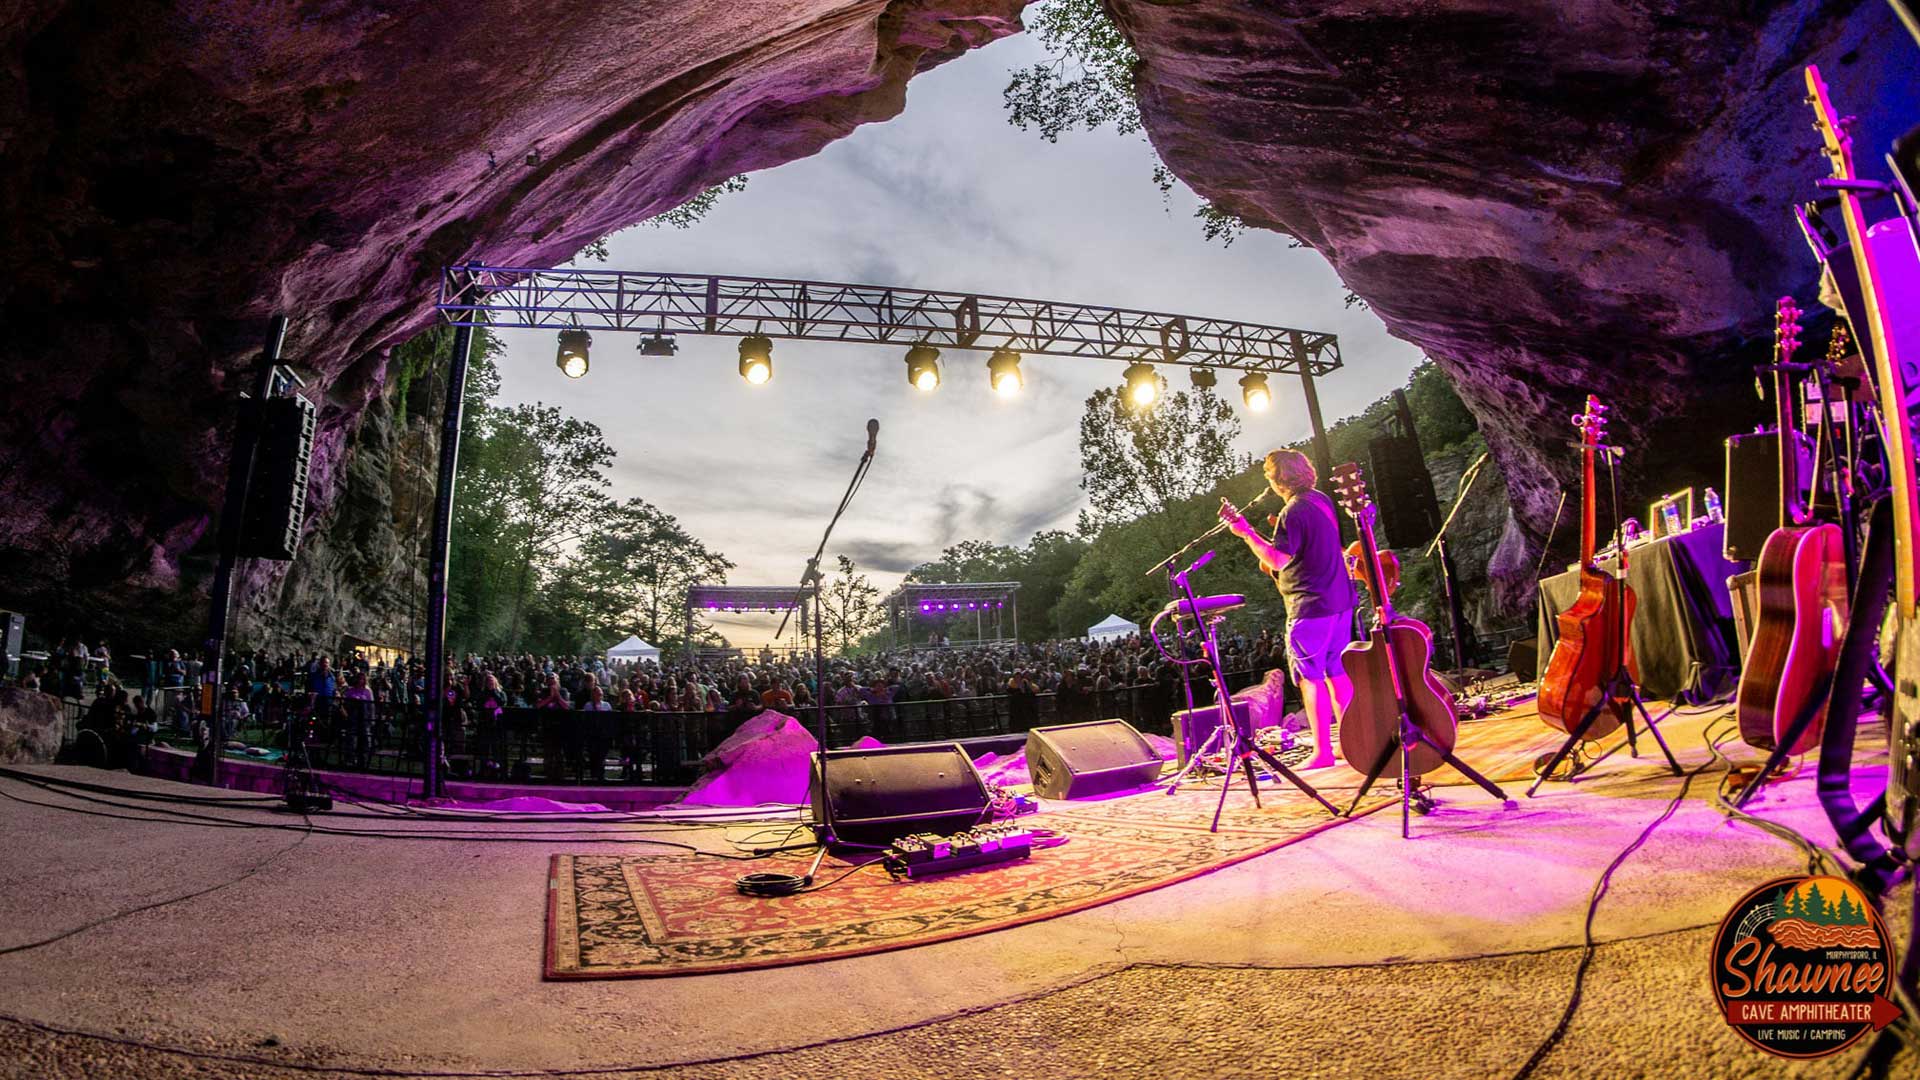 Concert at Shawnee Cave in Shawnee National Forest Illinois